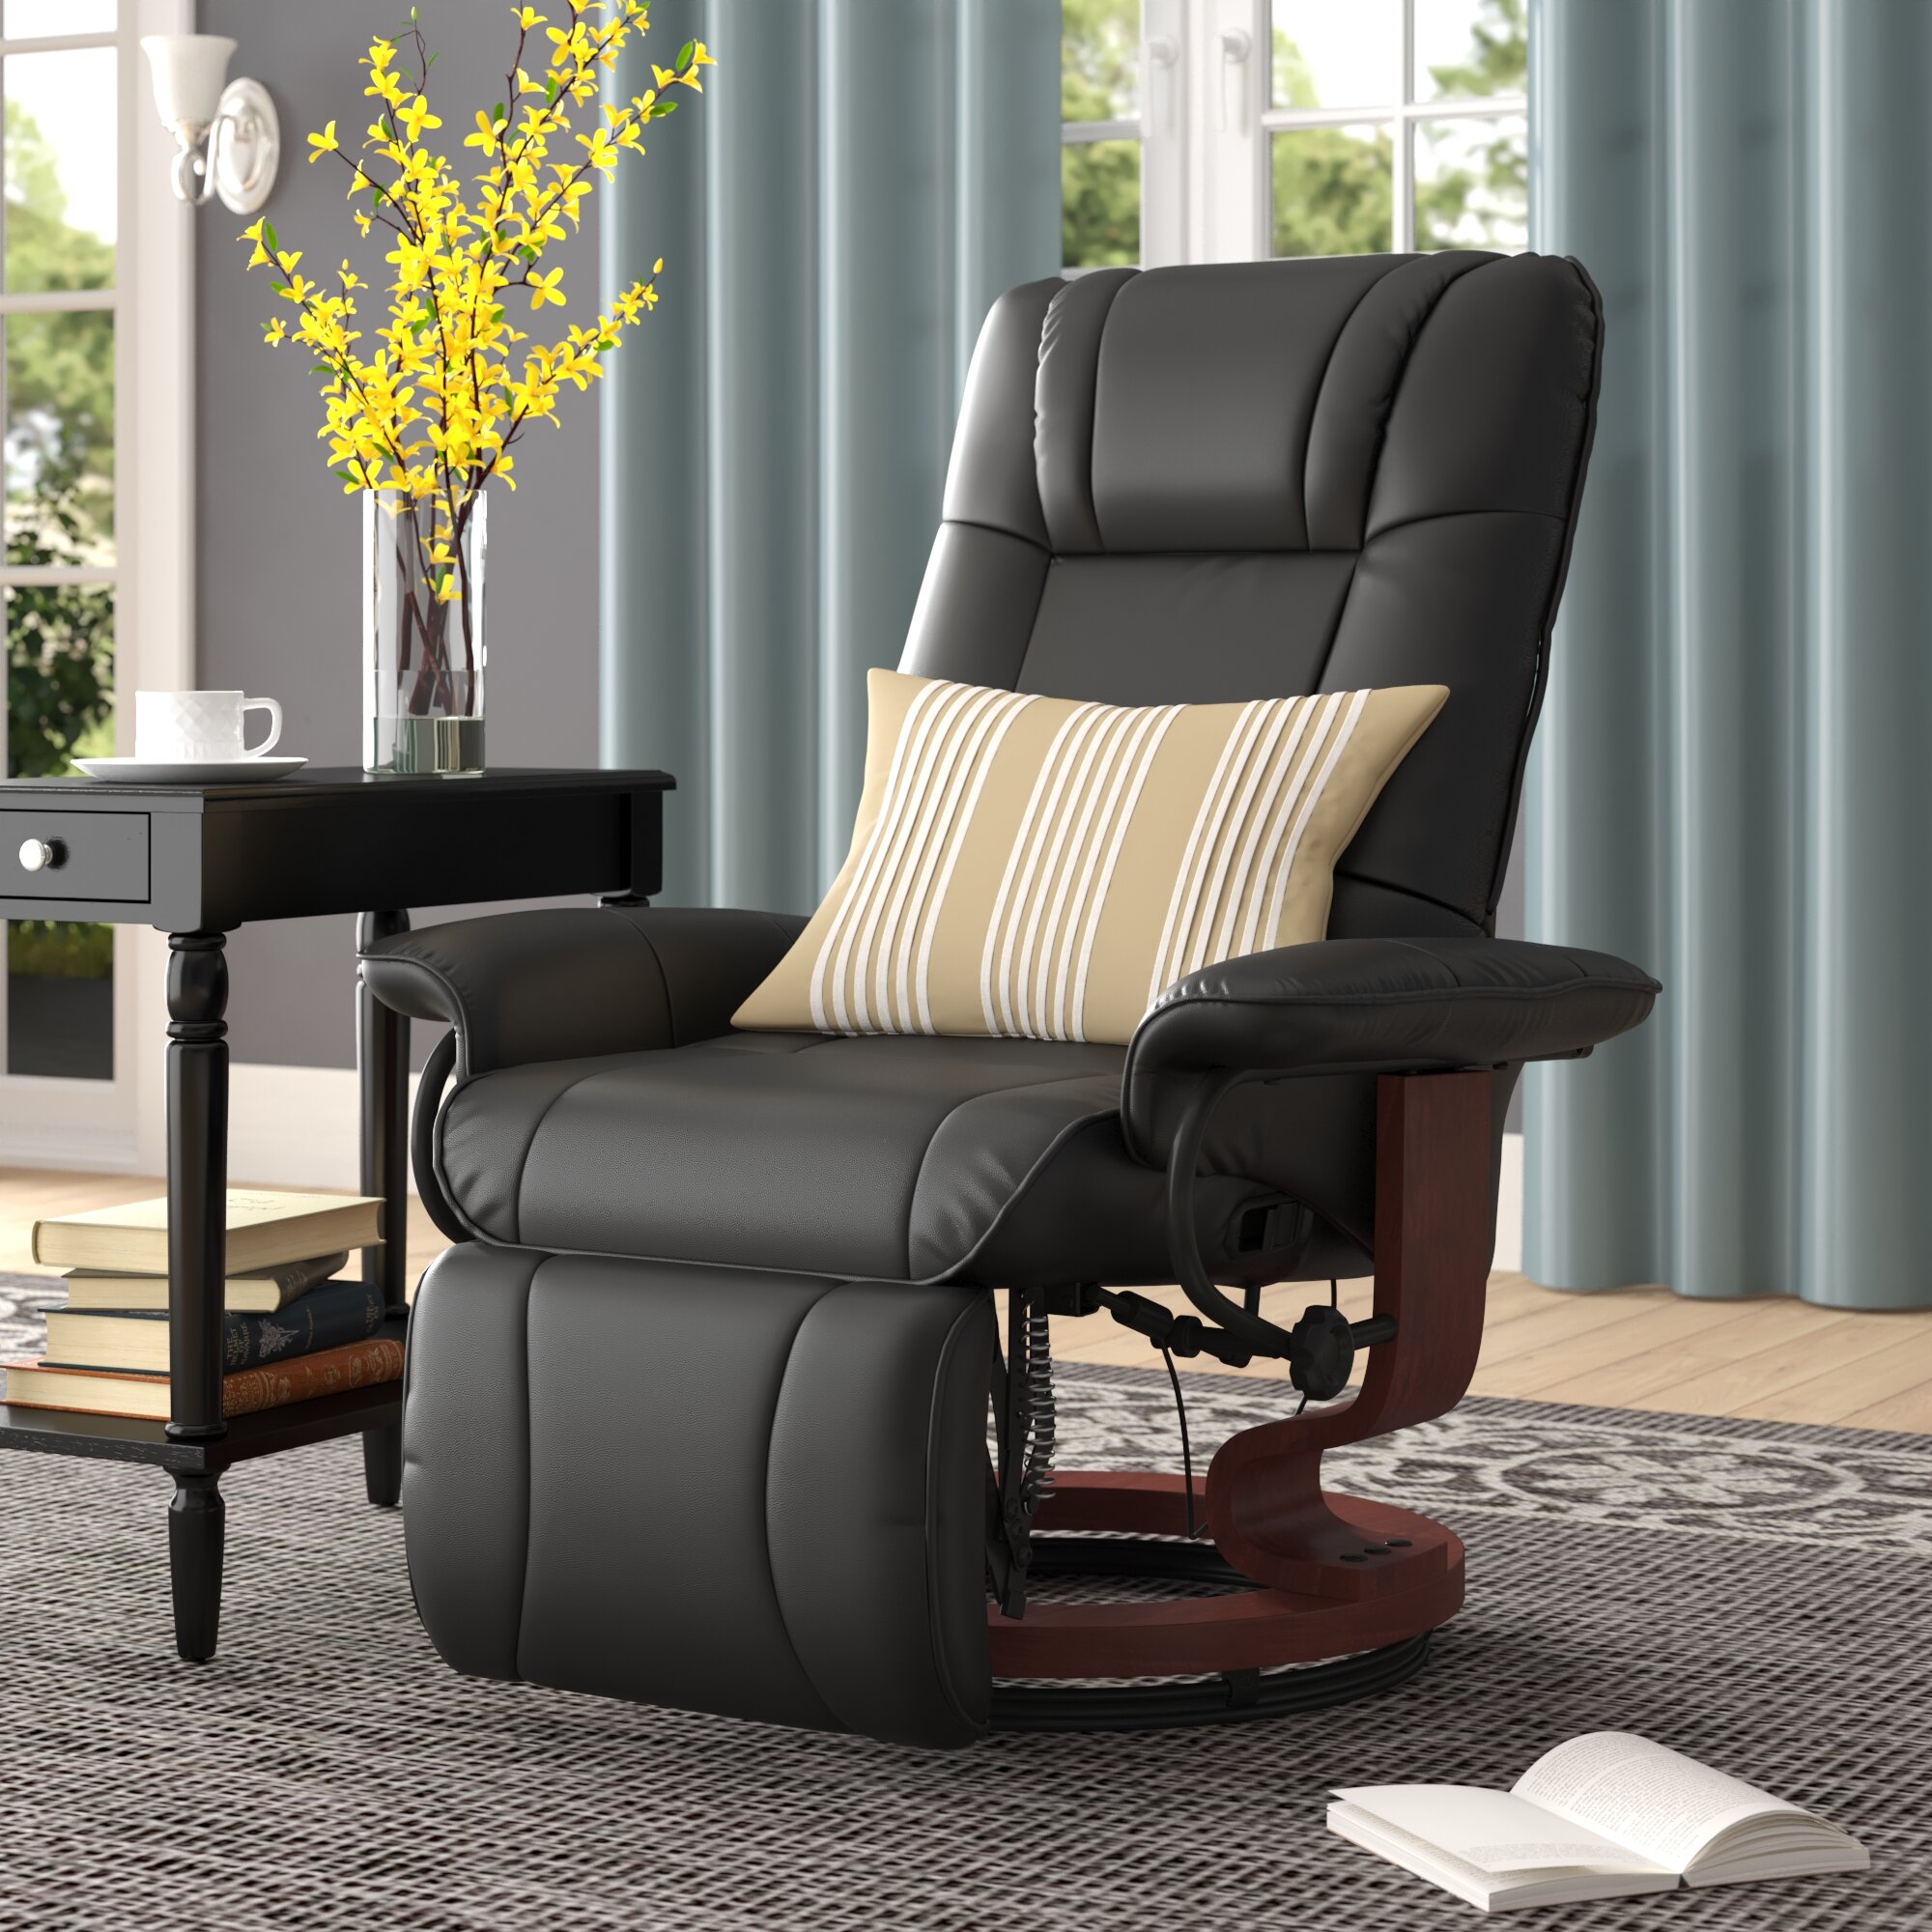 leather swivel recliner chair suppliers